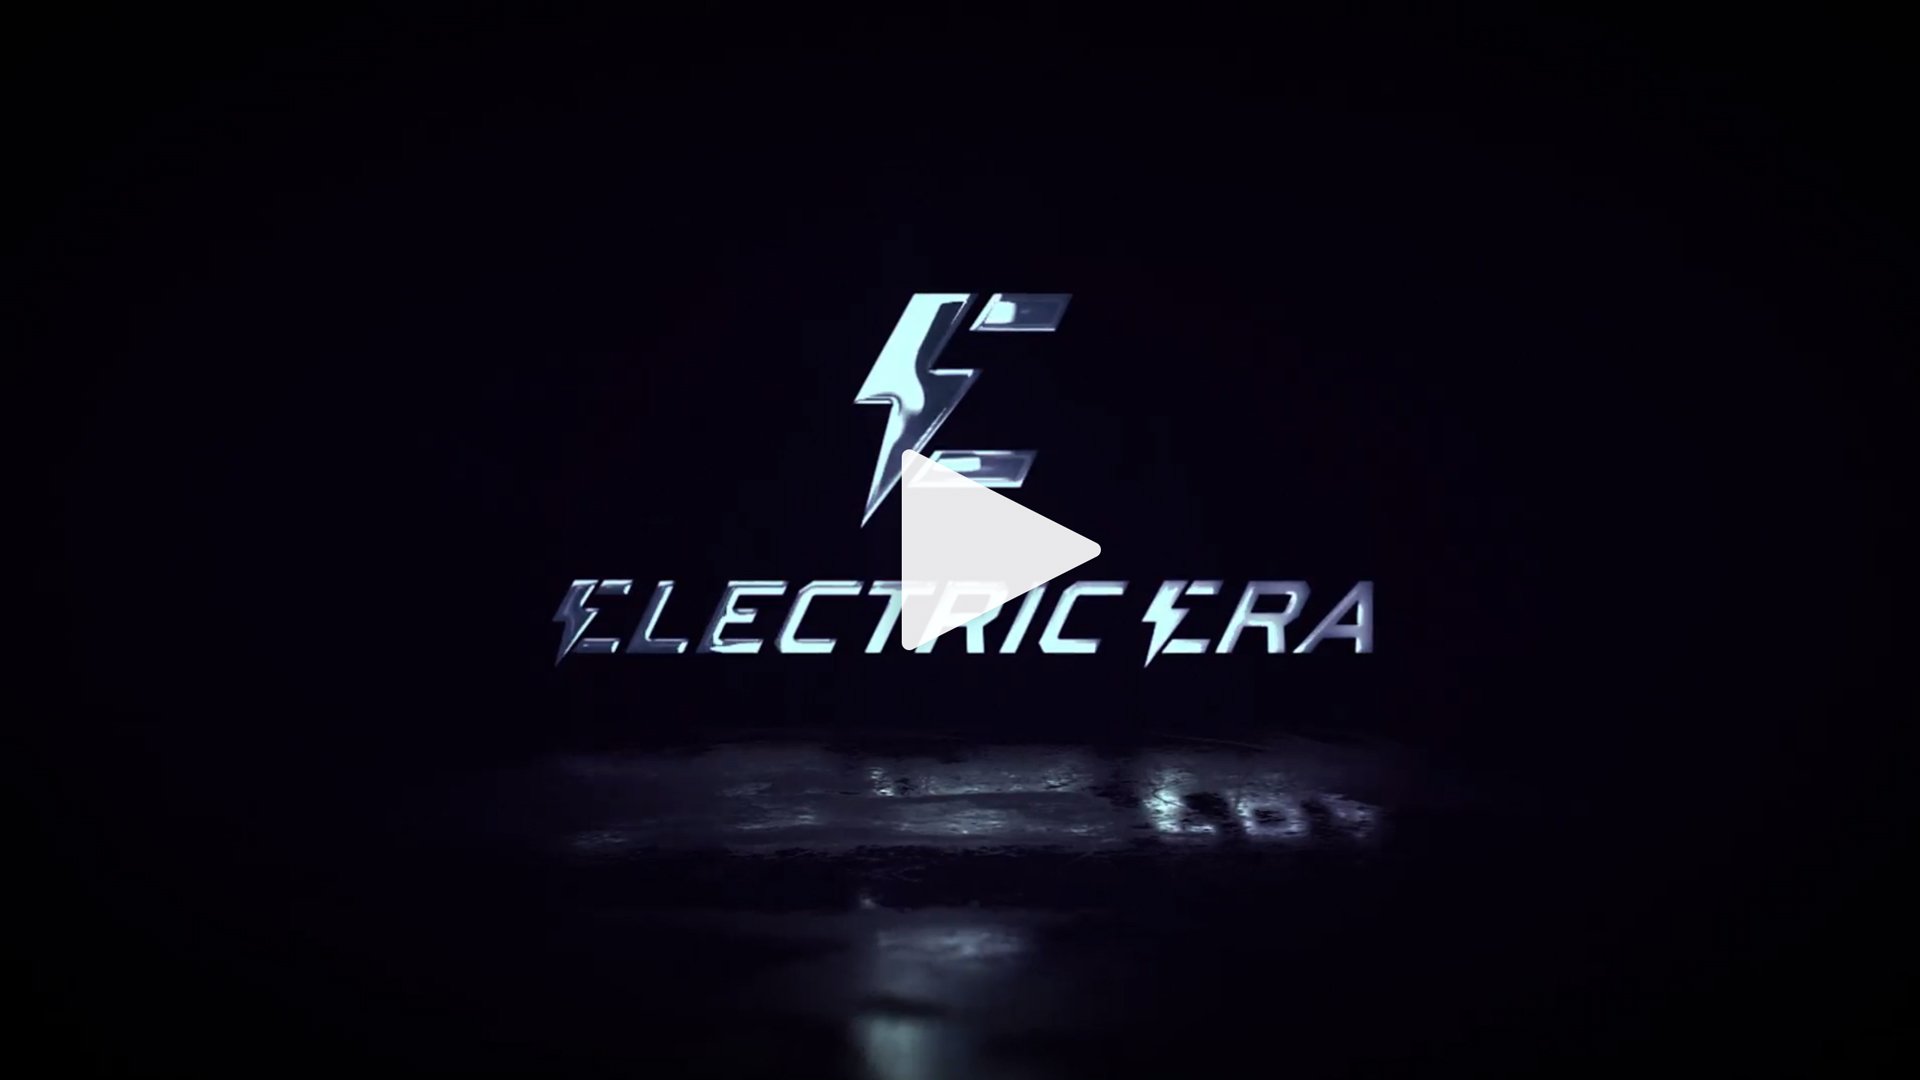 The Electric Era is here.